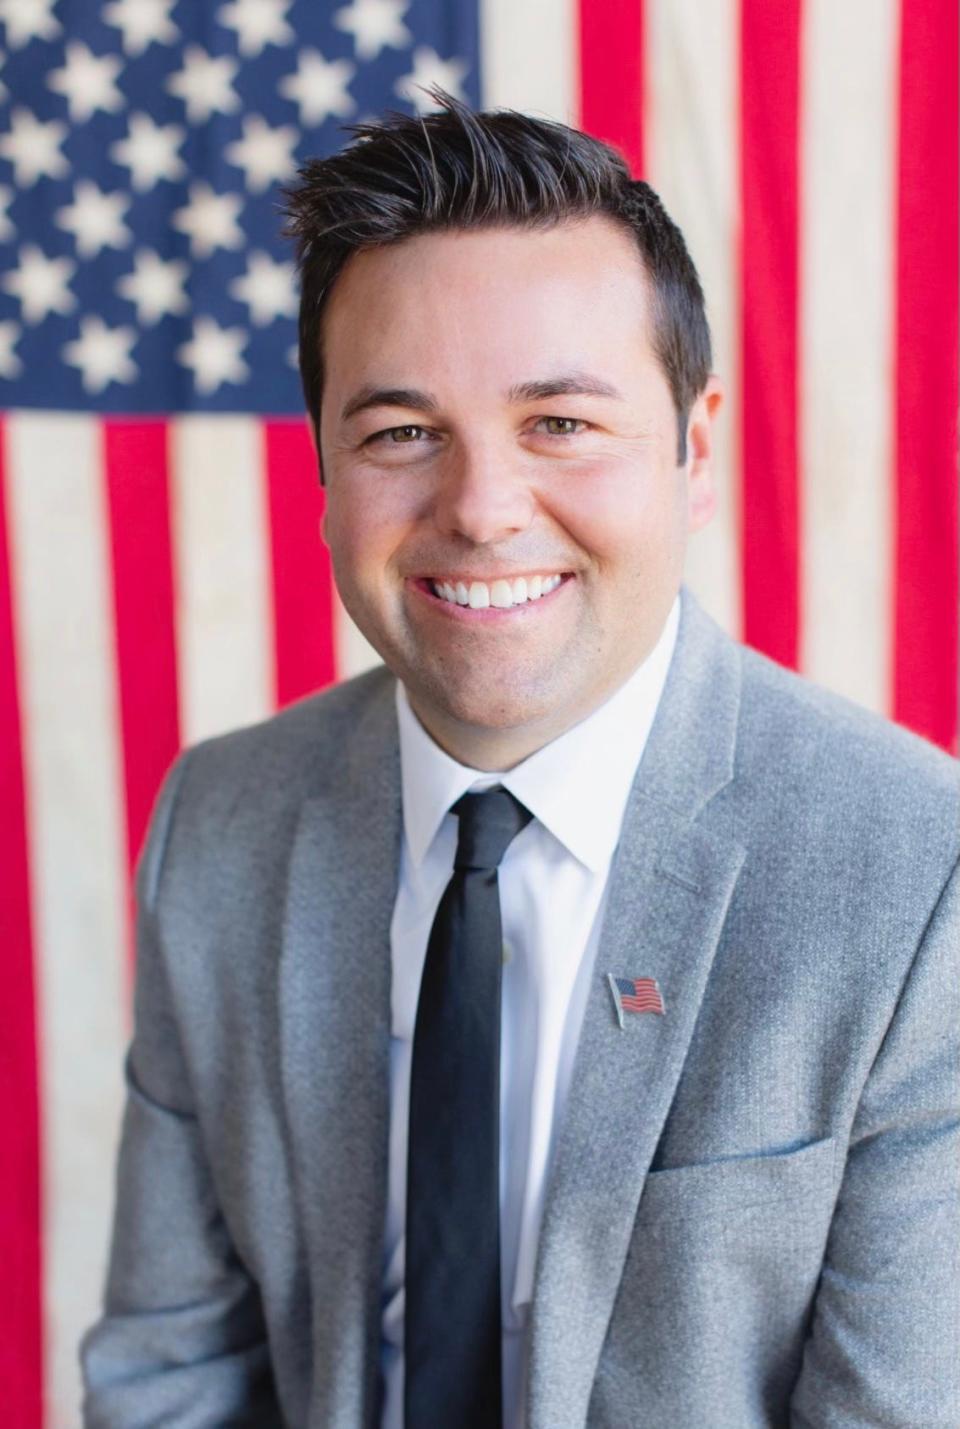 Micah Beckwith announced on June 5, 2023, that he is running for Indiana lieutenant governor, breaking long-standing tradition of gubernatorial candidates choosing their running mates.